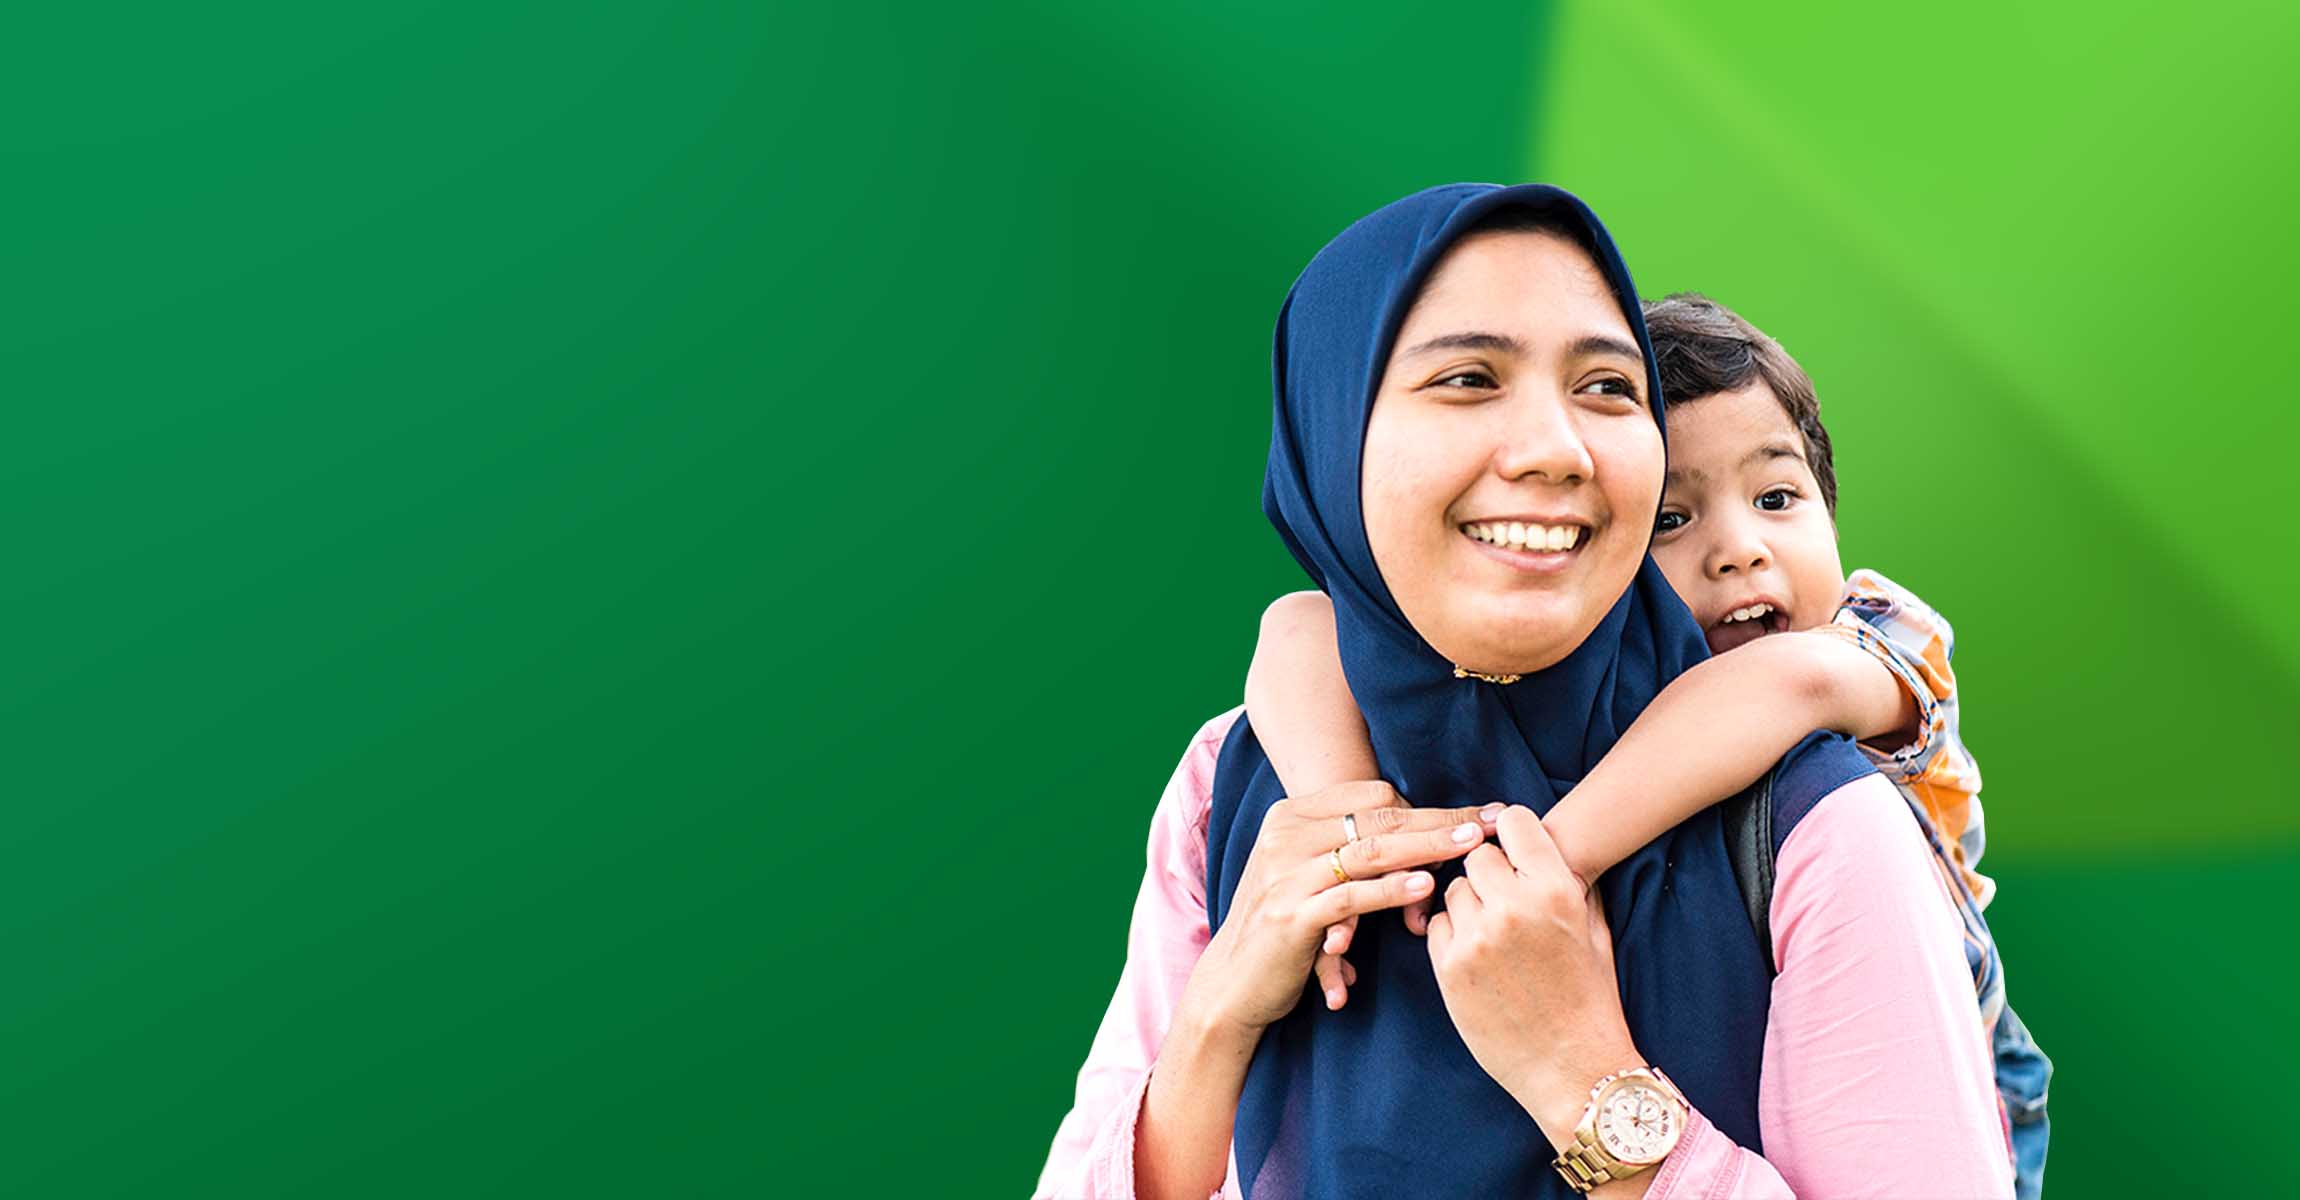 Smiling woman in hijab with child